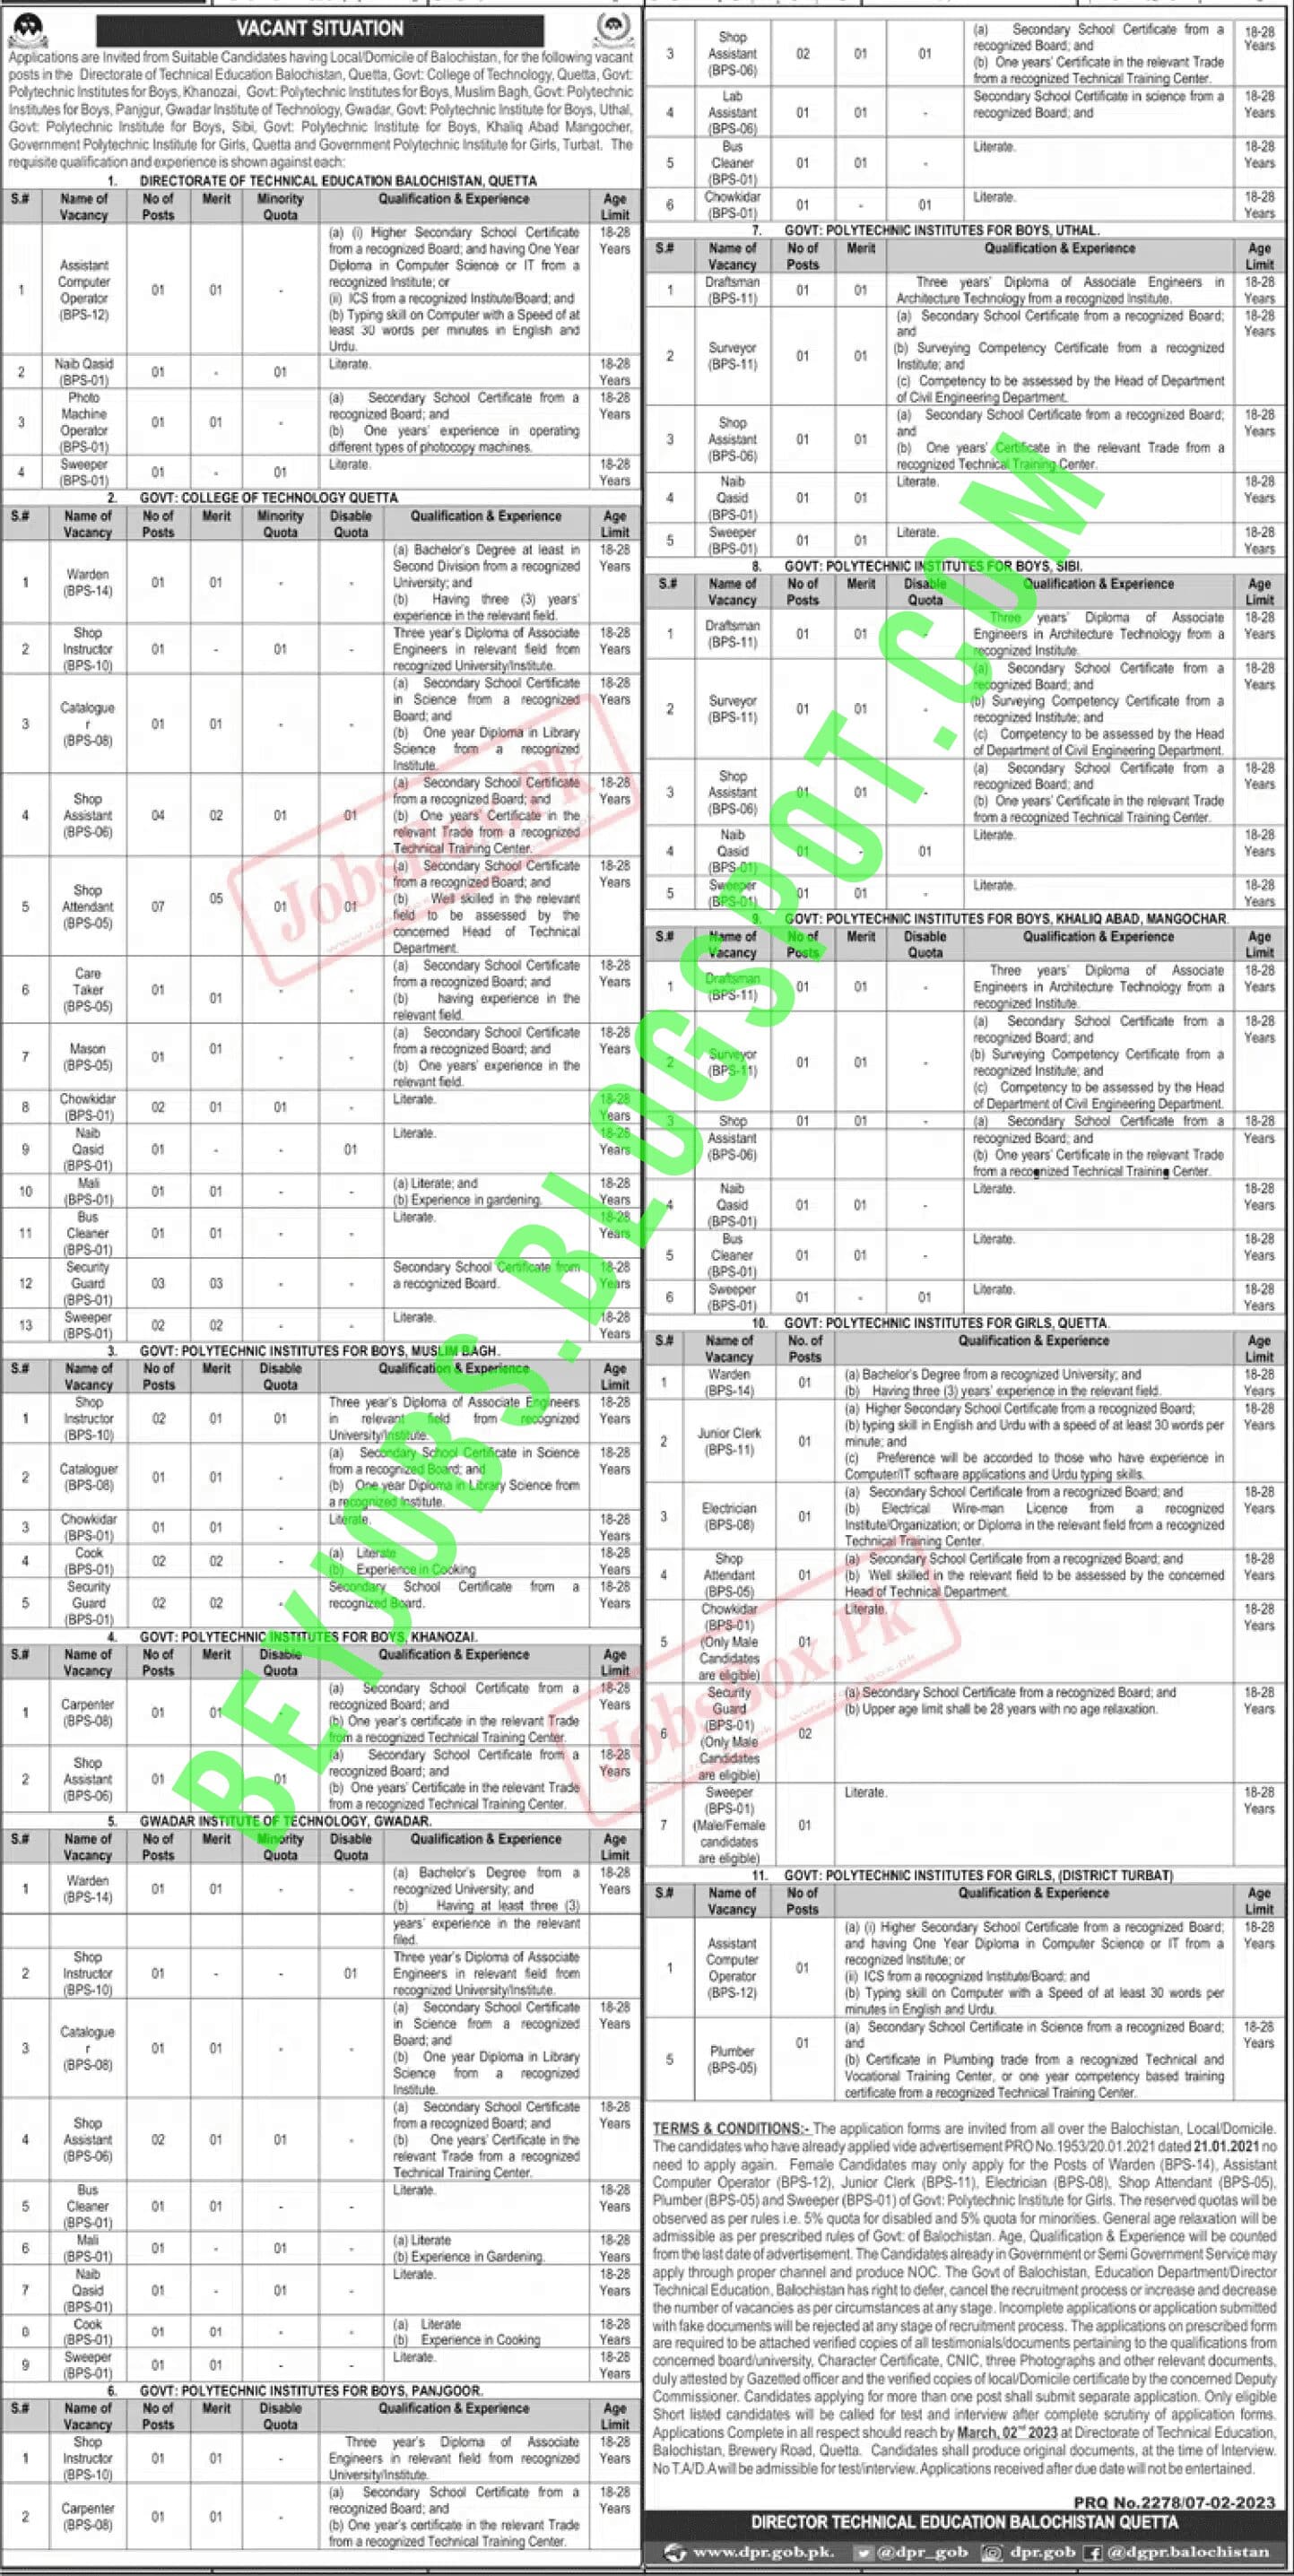 Latest Govt Jobs in Balochistan Technical Education Department 20 Positions with Multiple Vacancies apply before March 02,2023.